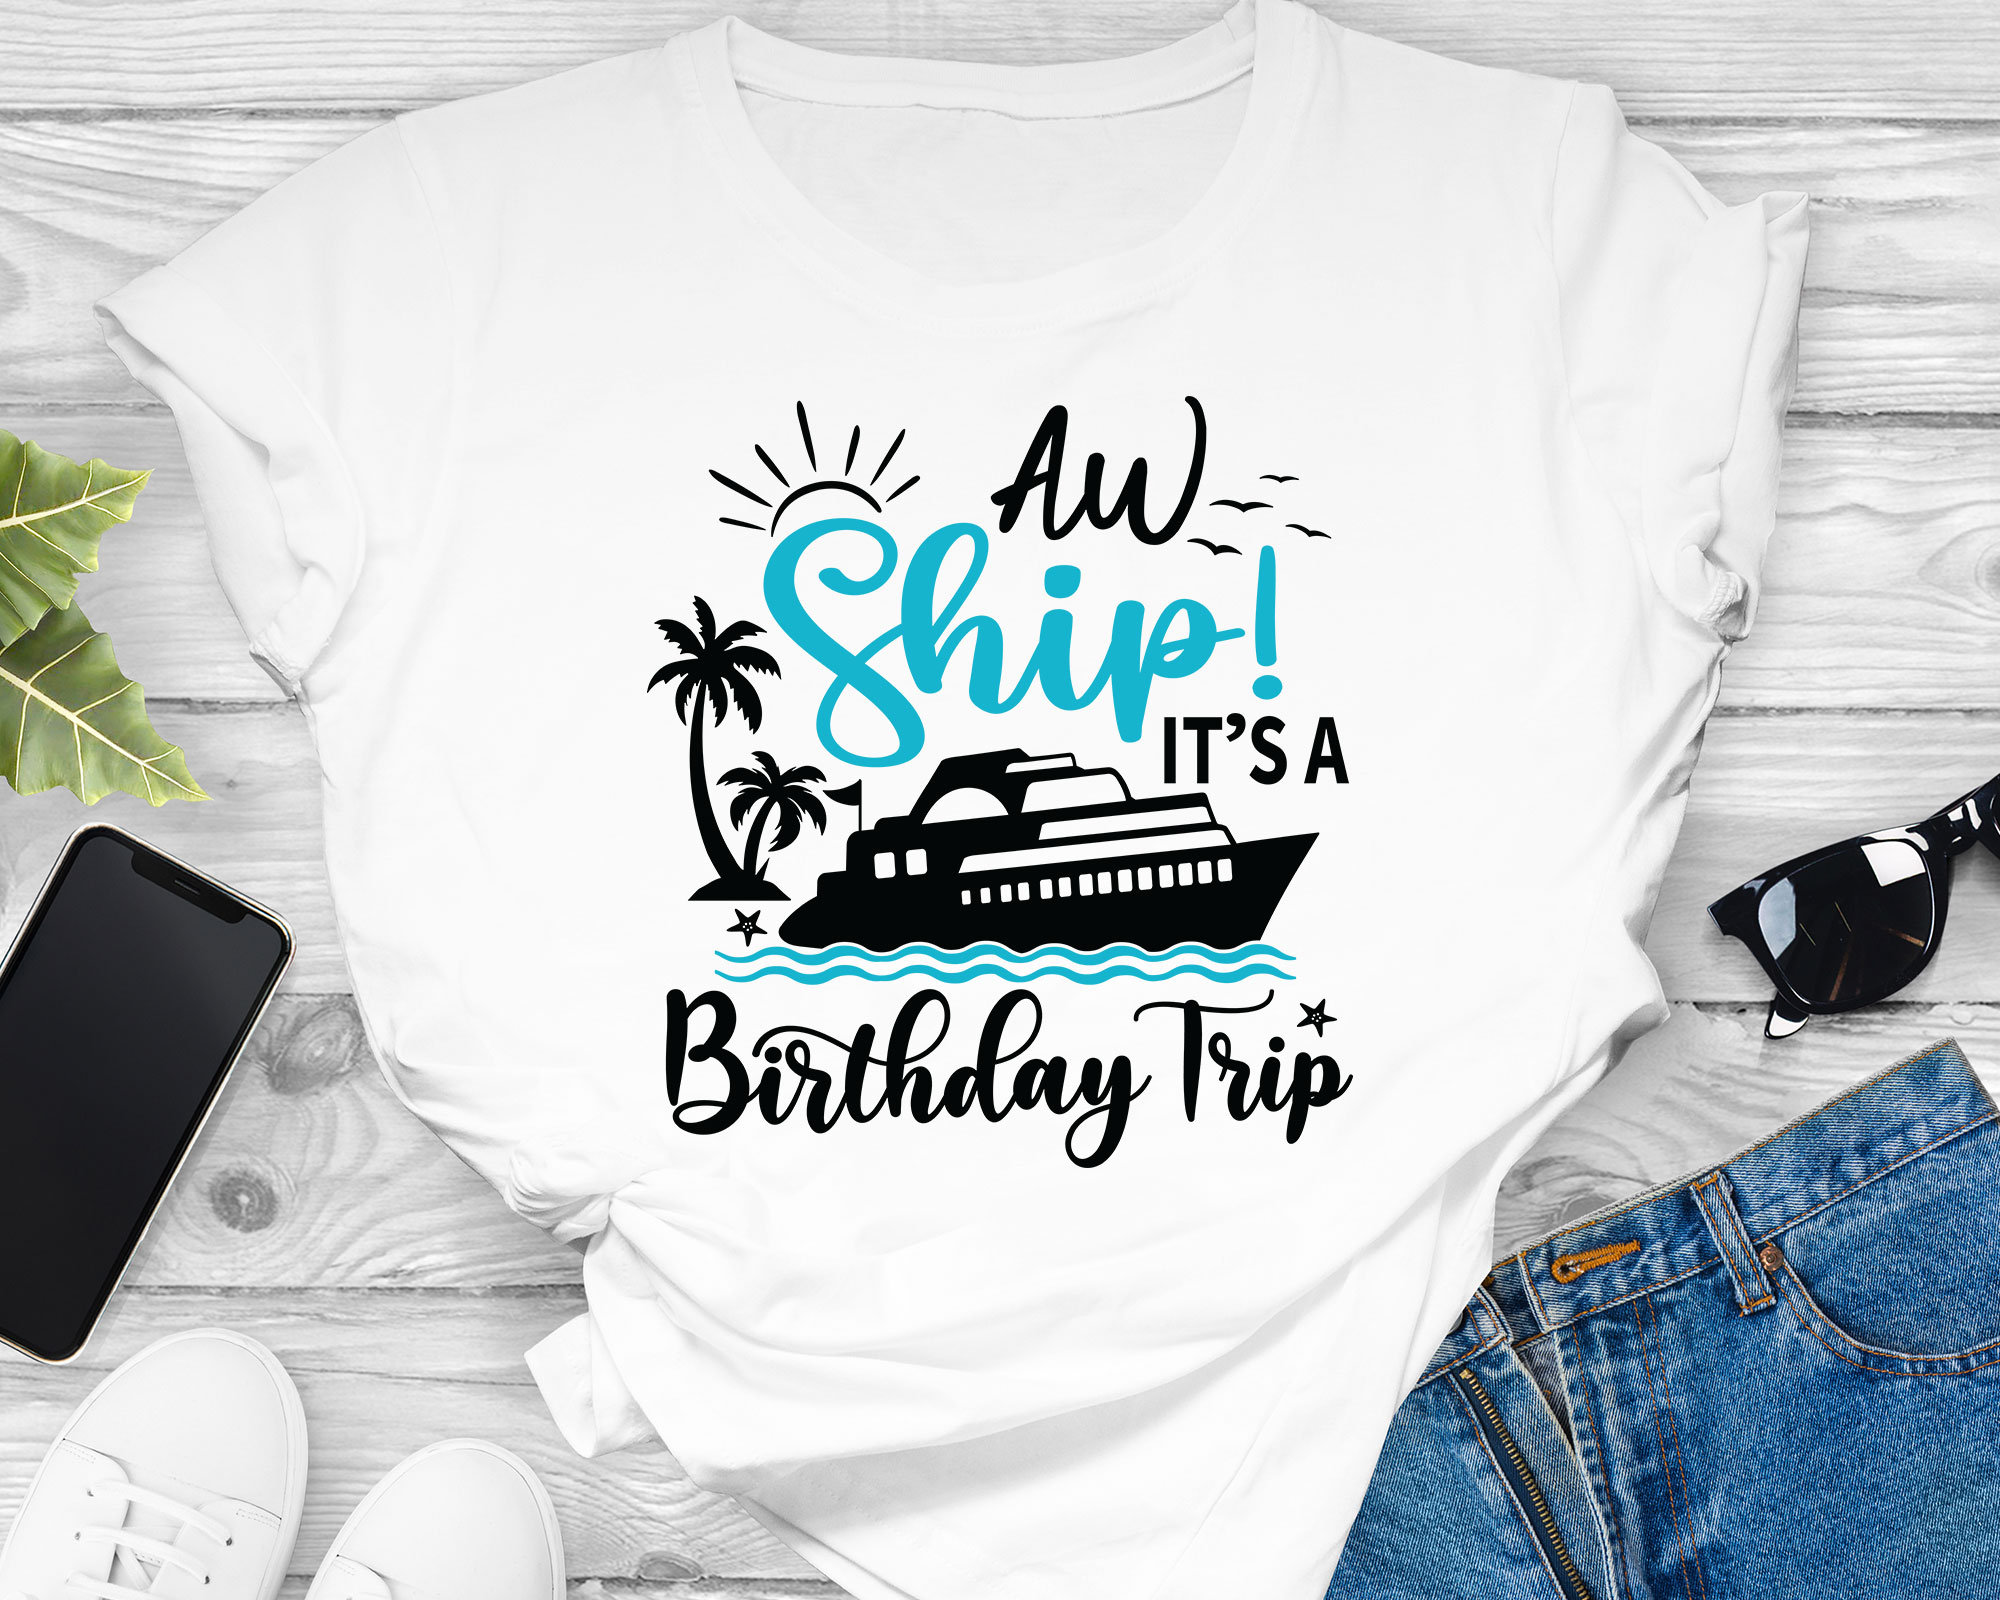 Aw Ship It's A Birthday Trip SVG Cruise SVG Cut File - Etsy